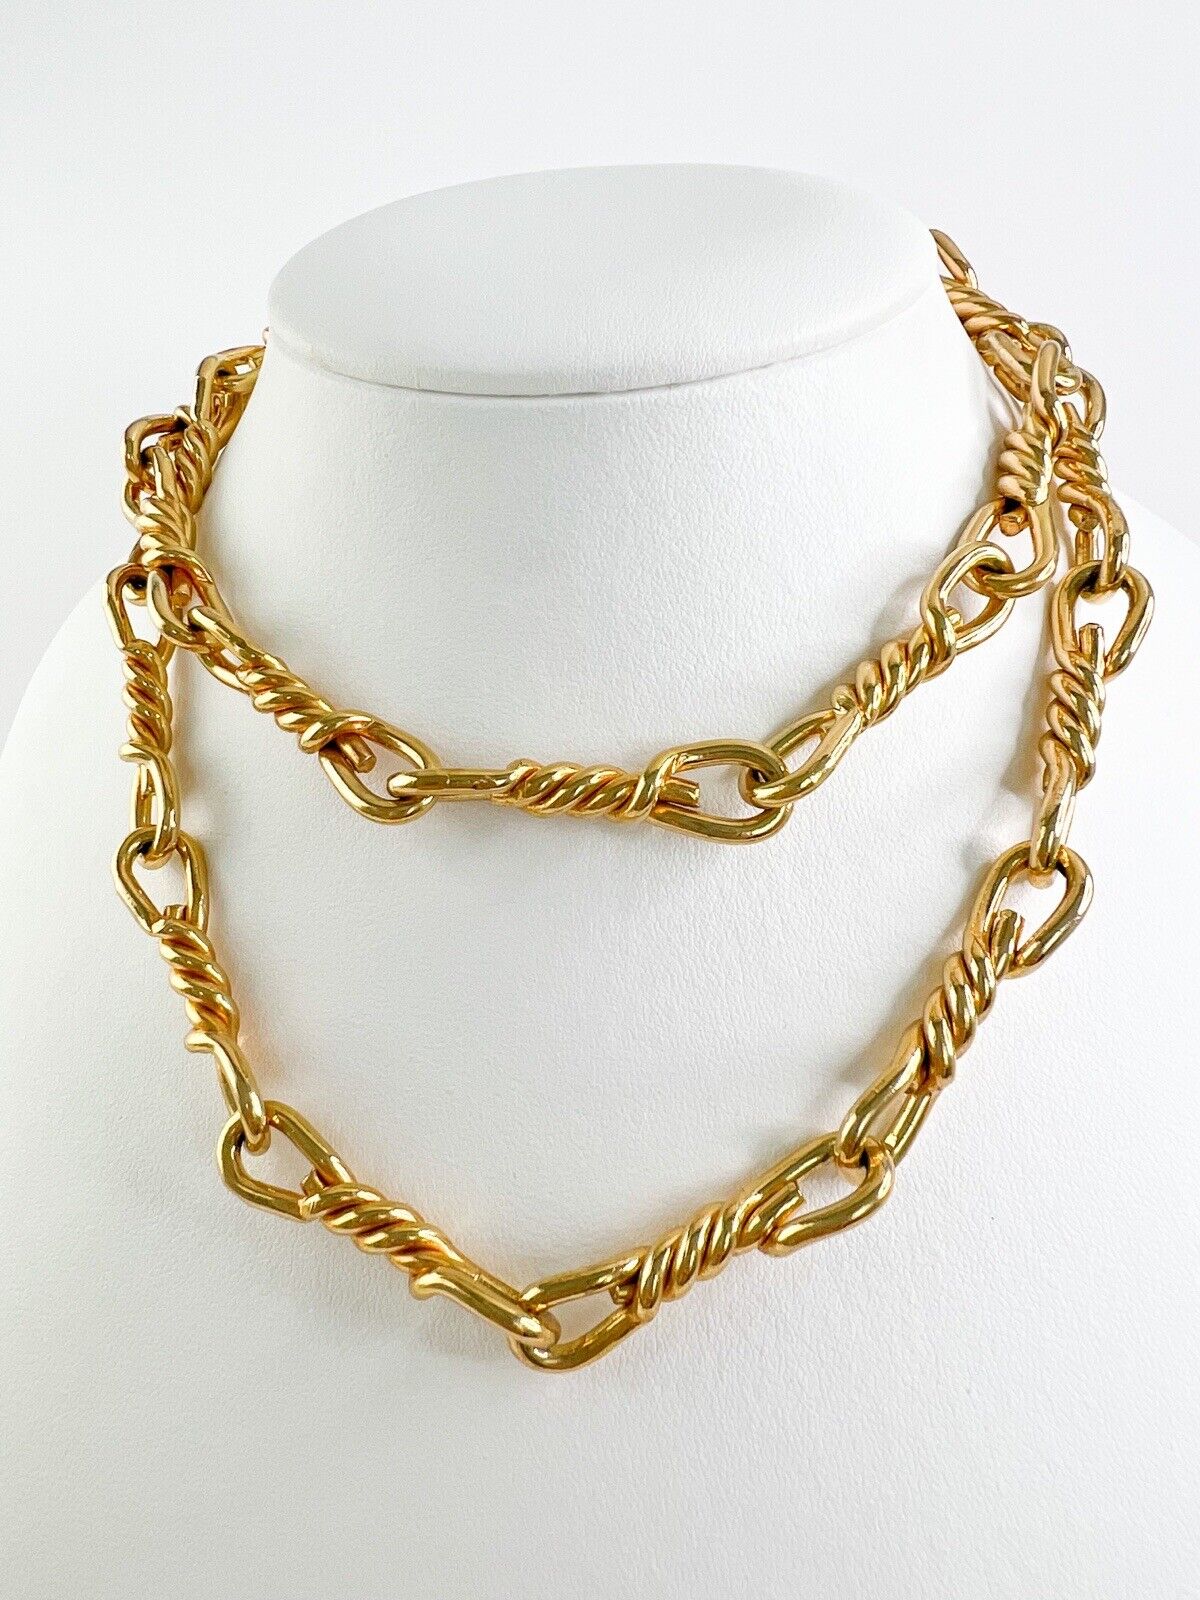 Vintage Christian Dior Necklace, Chain Necklace Gold, Dior Germany 1973, Dior necklace, vintage Dior, Unisex necklace, Personalized Gifts